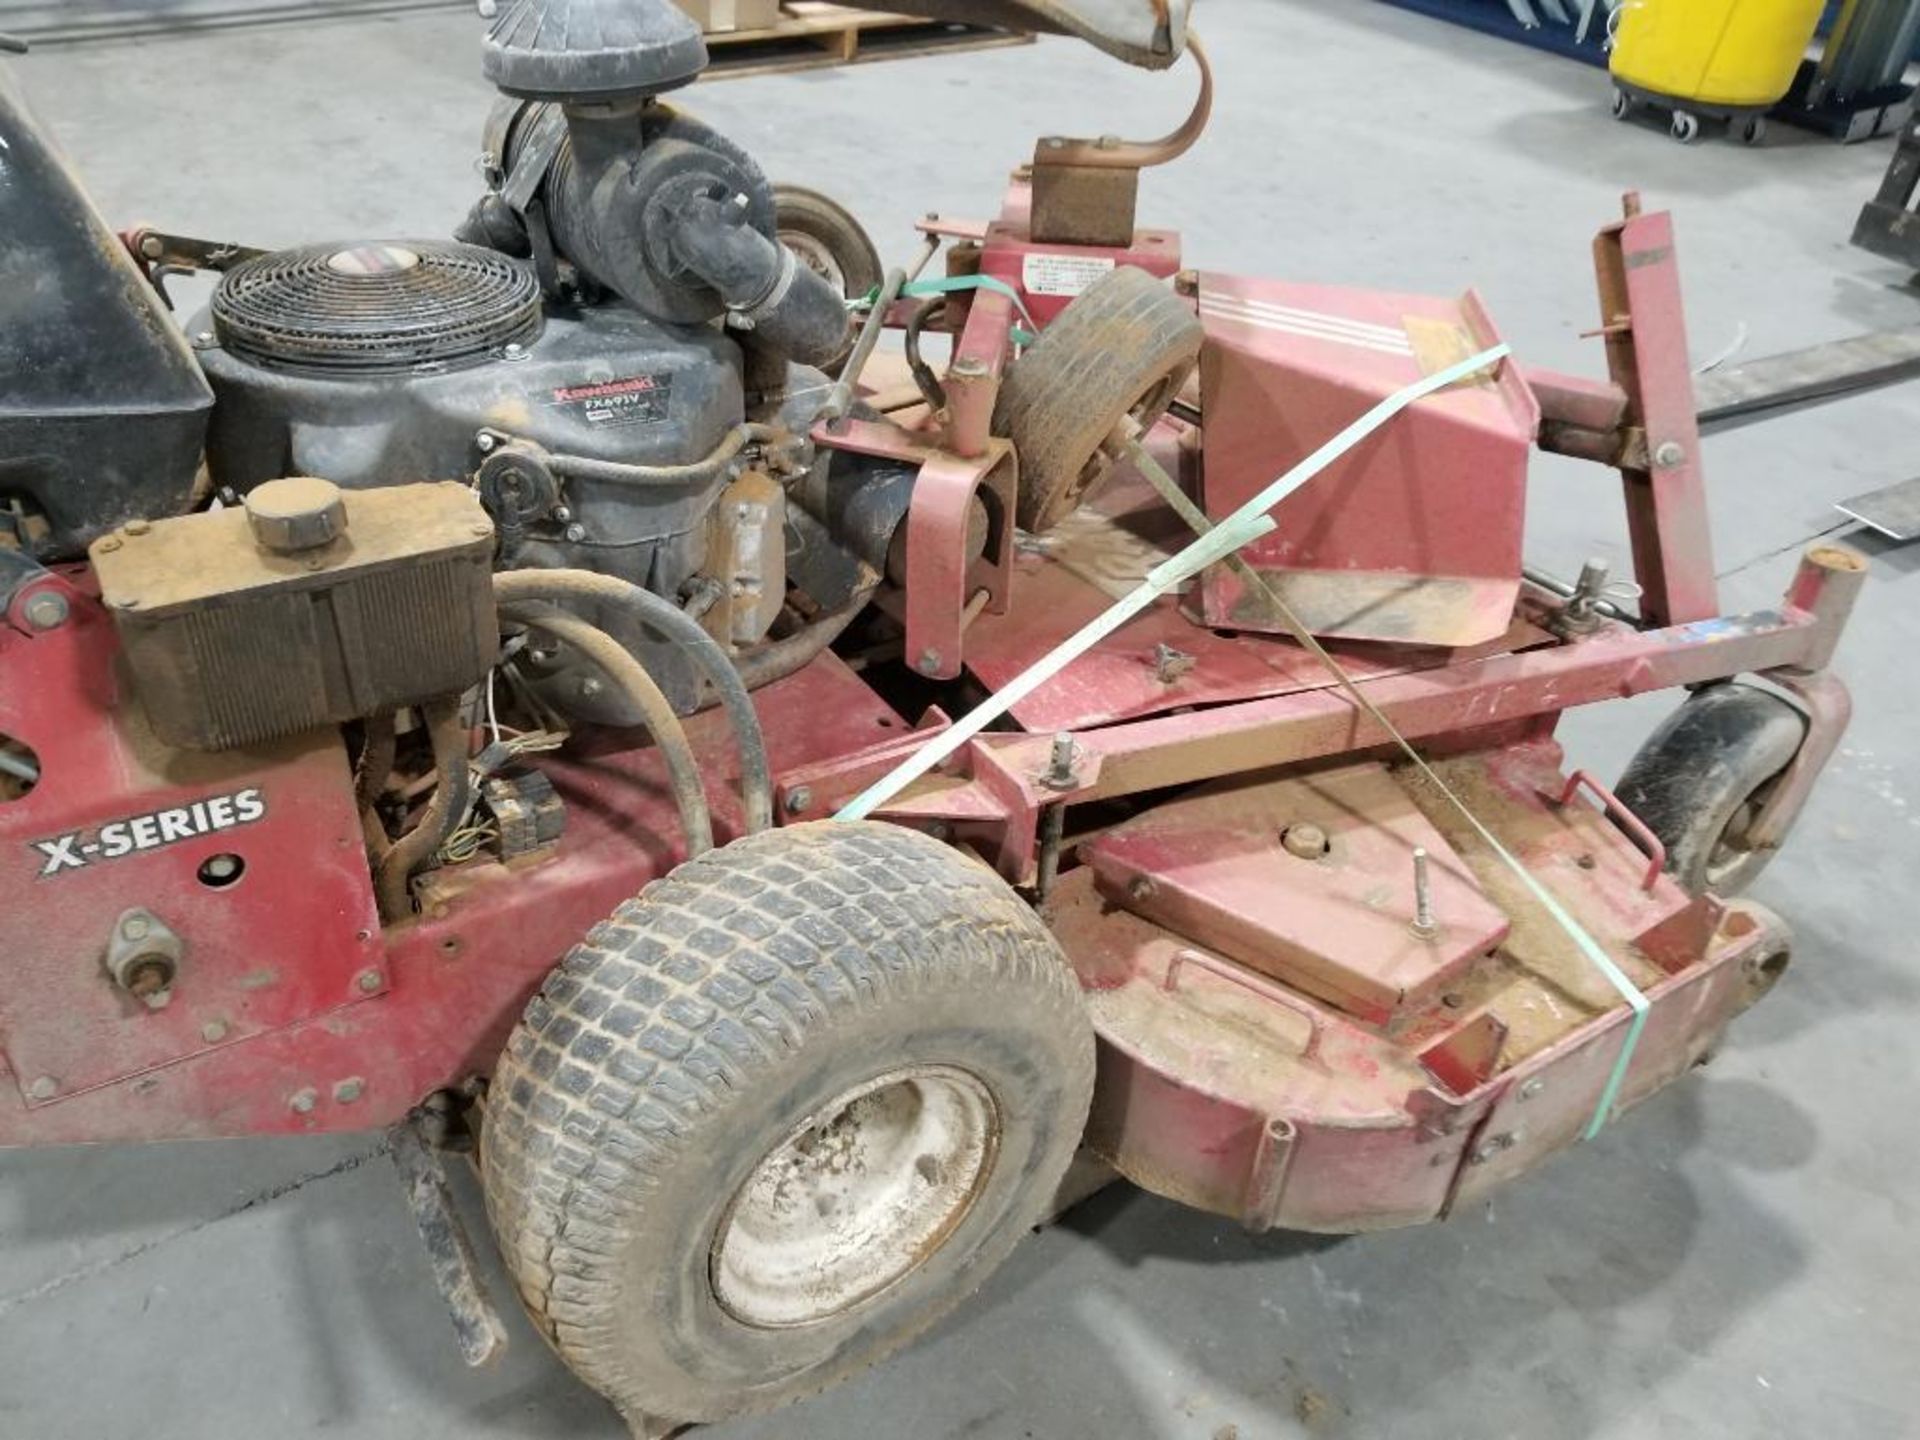 60in Exmark walk behind mower. Kawasaki 22hp engine. Working condition unknown. Battery is dead. - Image 2 of 20